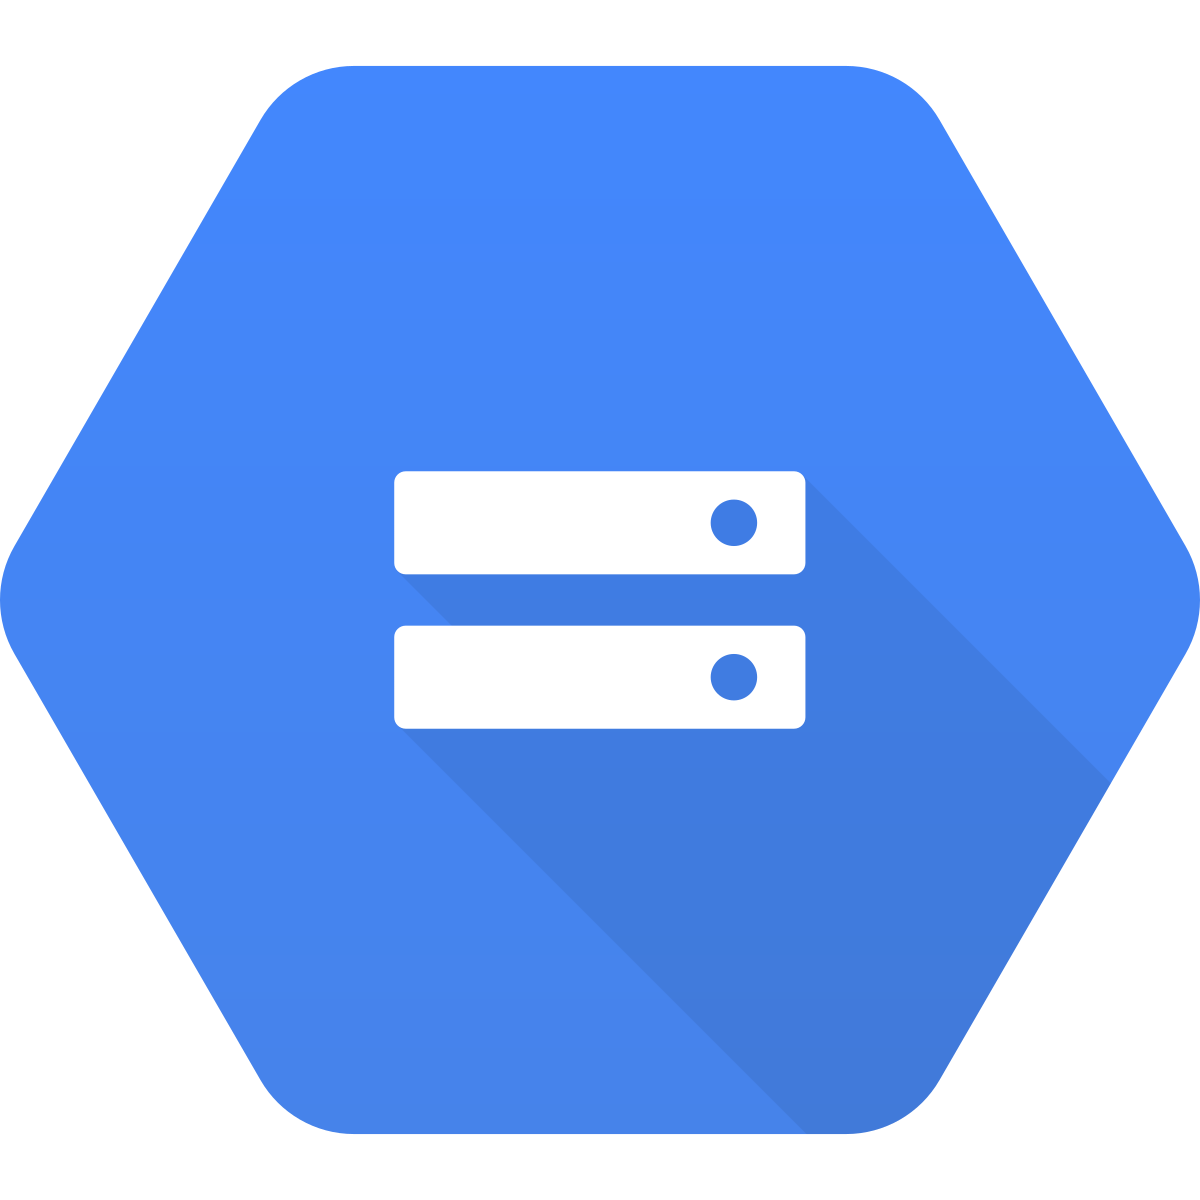 BlueConic Google Cloud Storage connection for integrating customer data